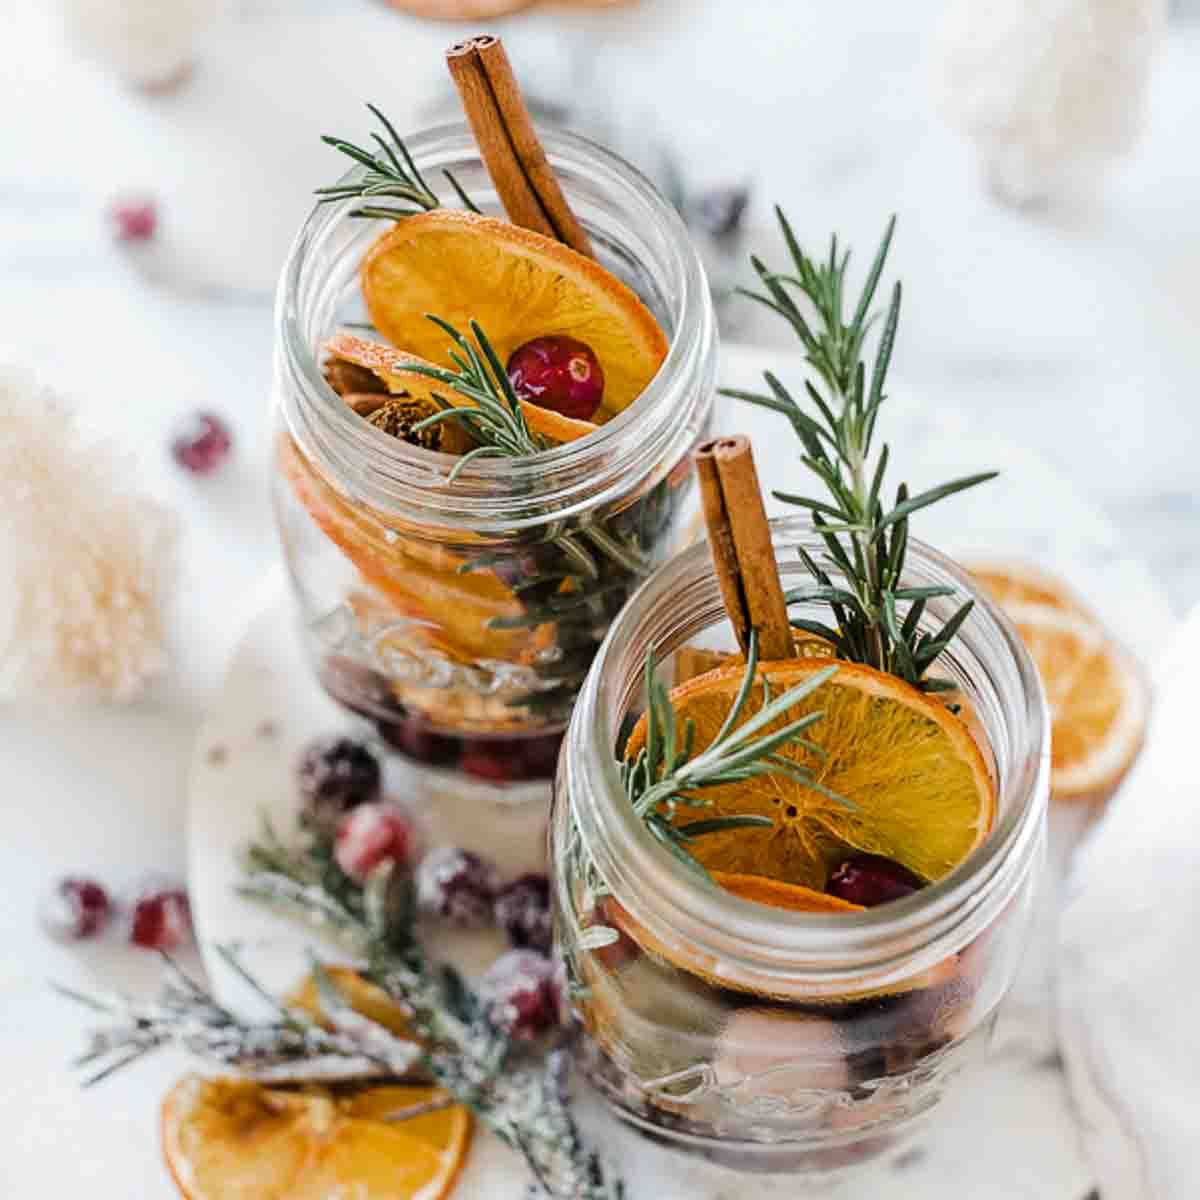 DIY Simmer Pot Gift Ideas For Christmas (easy recipe) - The Local